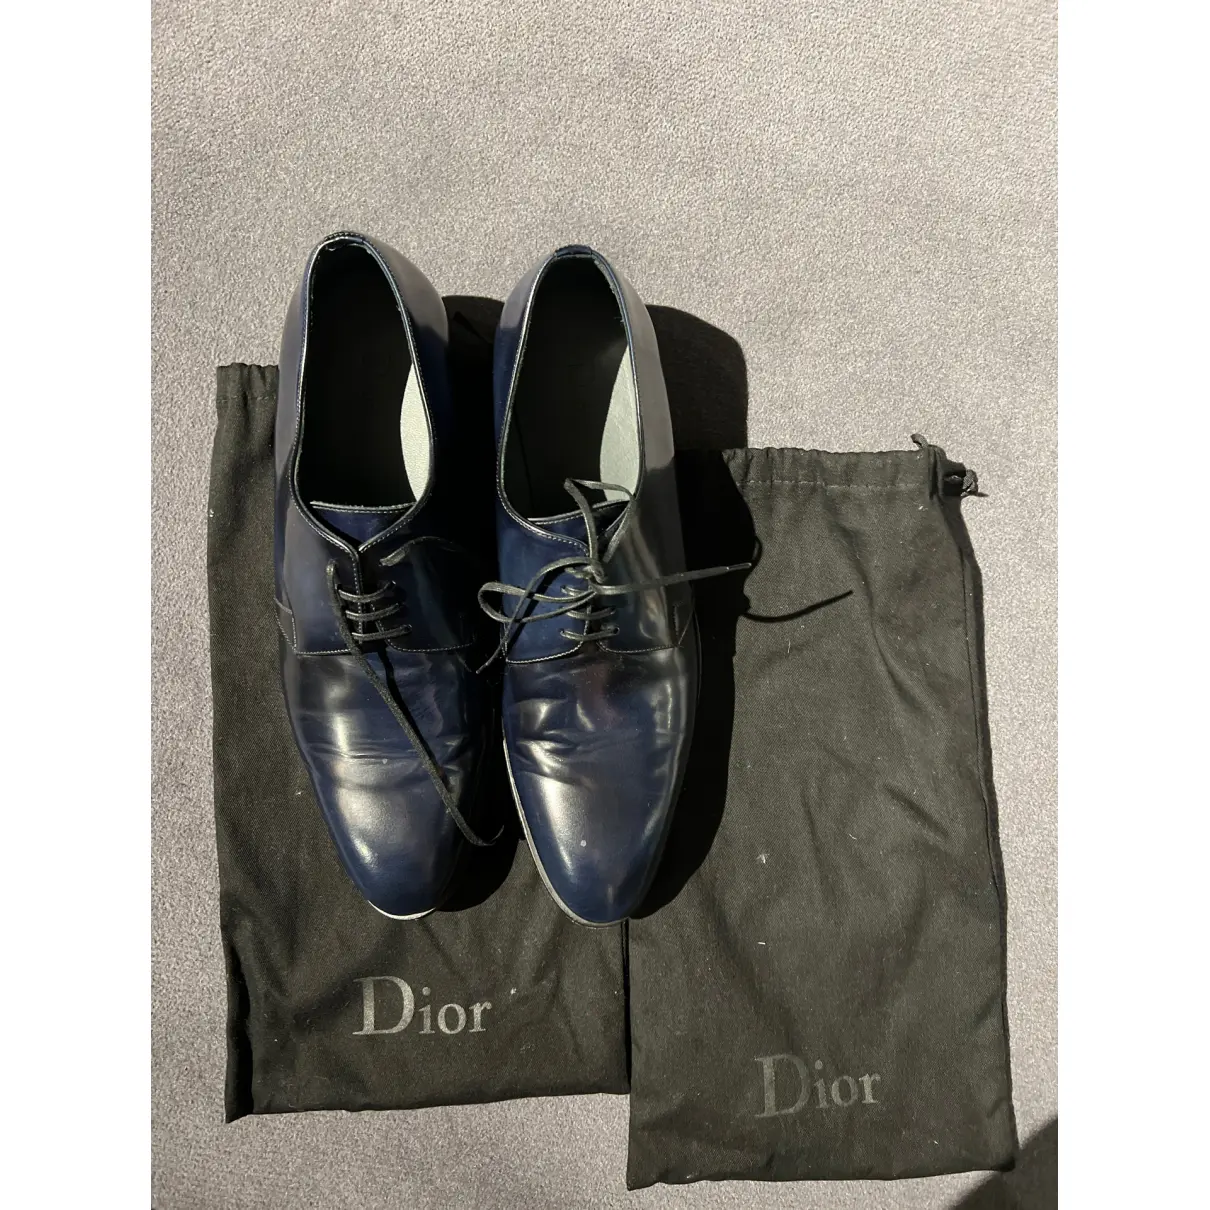 Buy Dior Homme Dior Timeless leather lace ups online